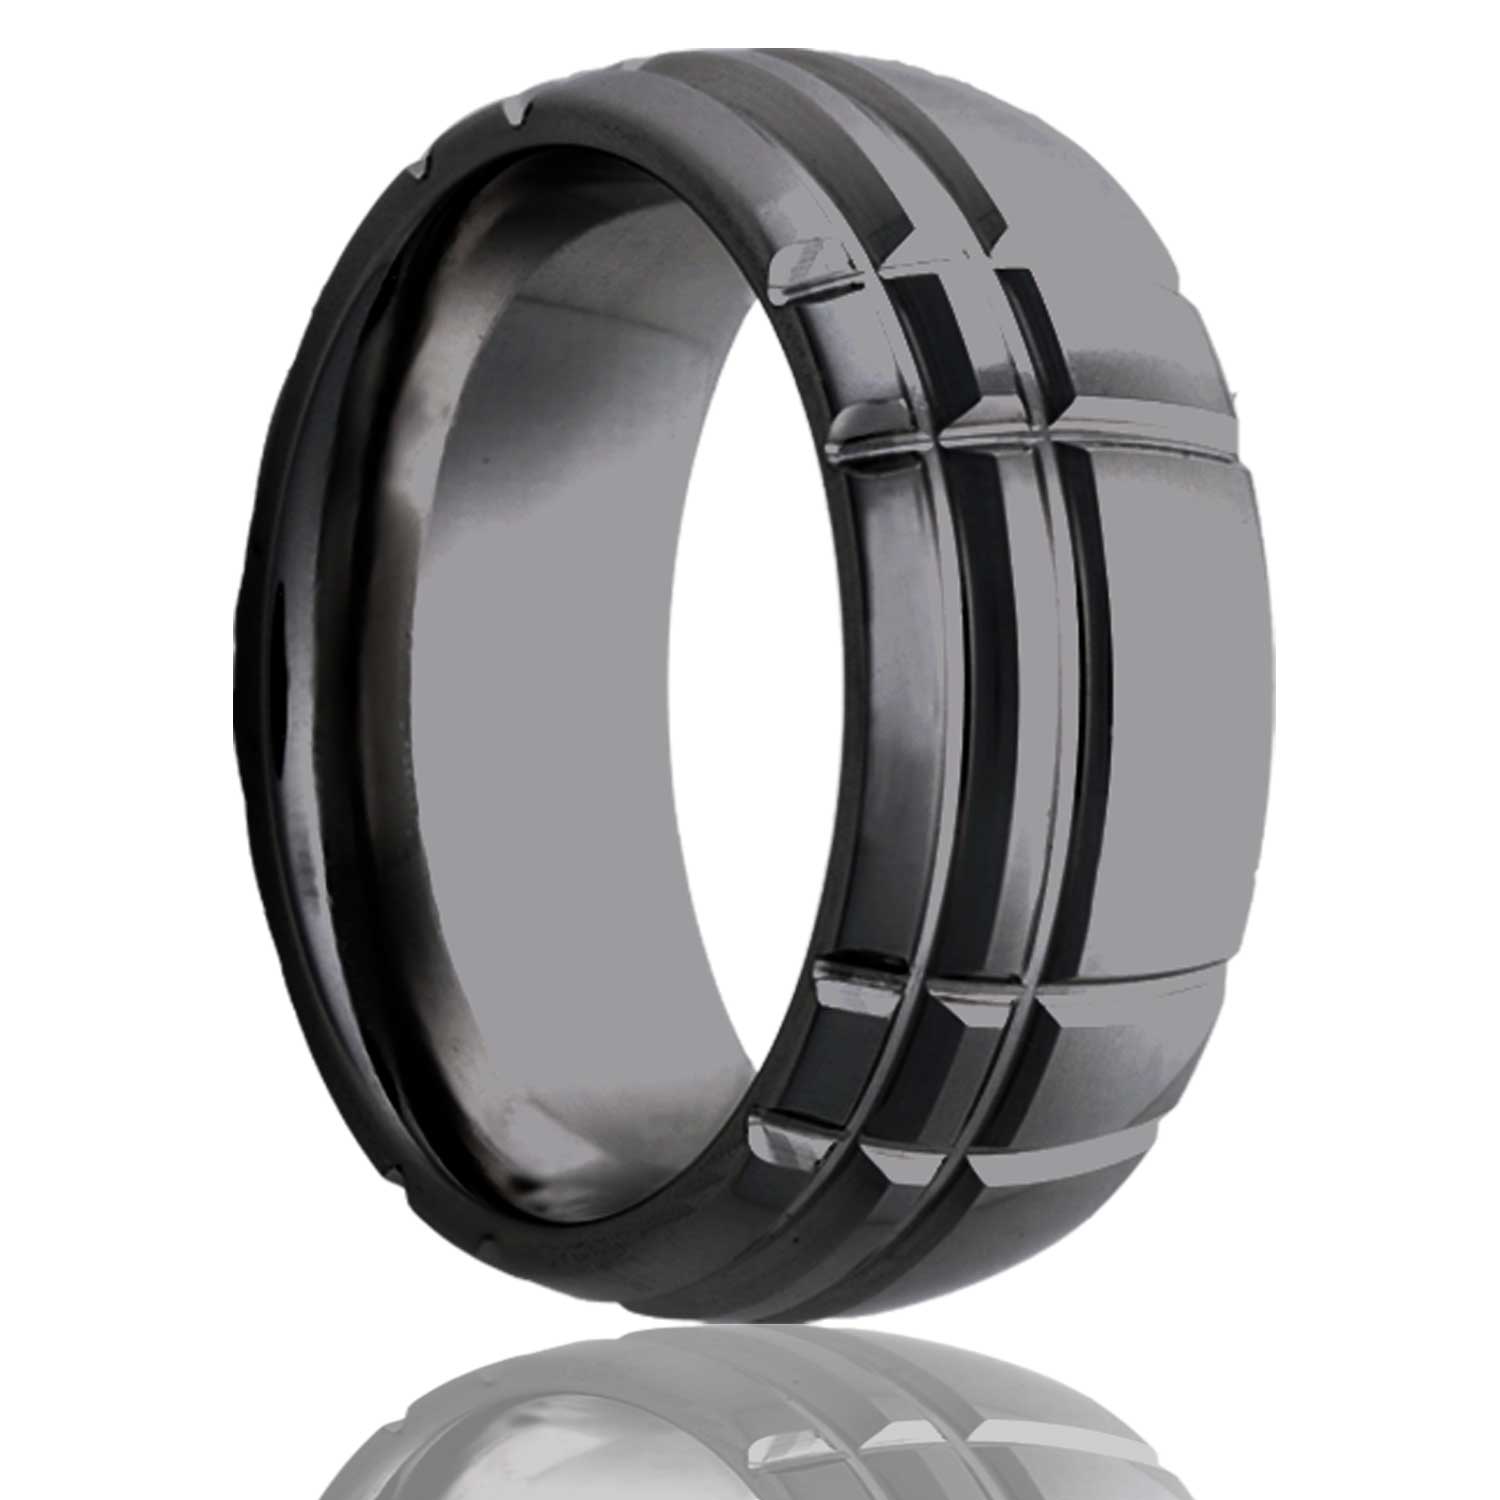 A asymmetrical intersecting grooves domed zirconium men's wedding band displayed on a neutral white background.